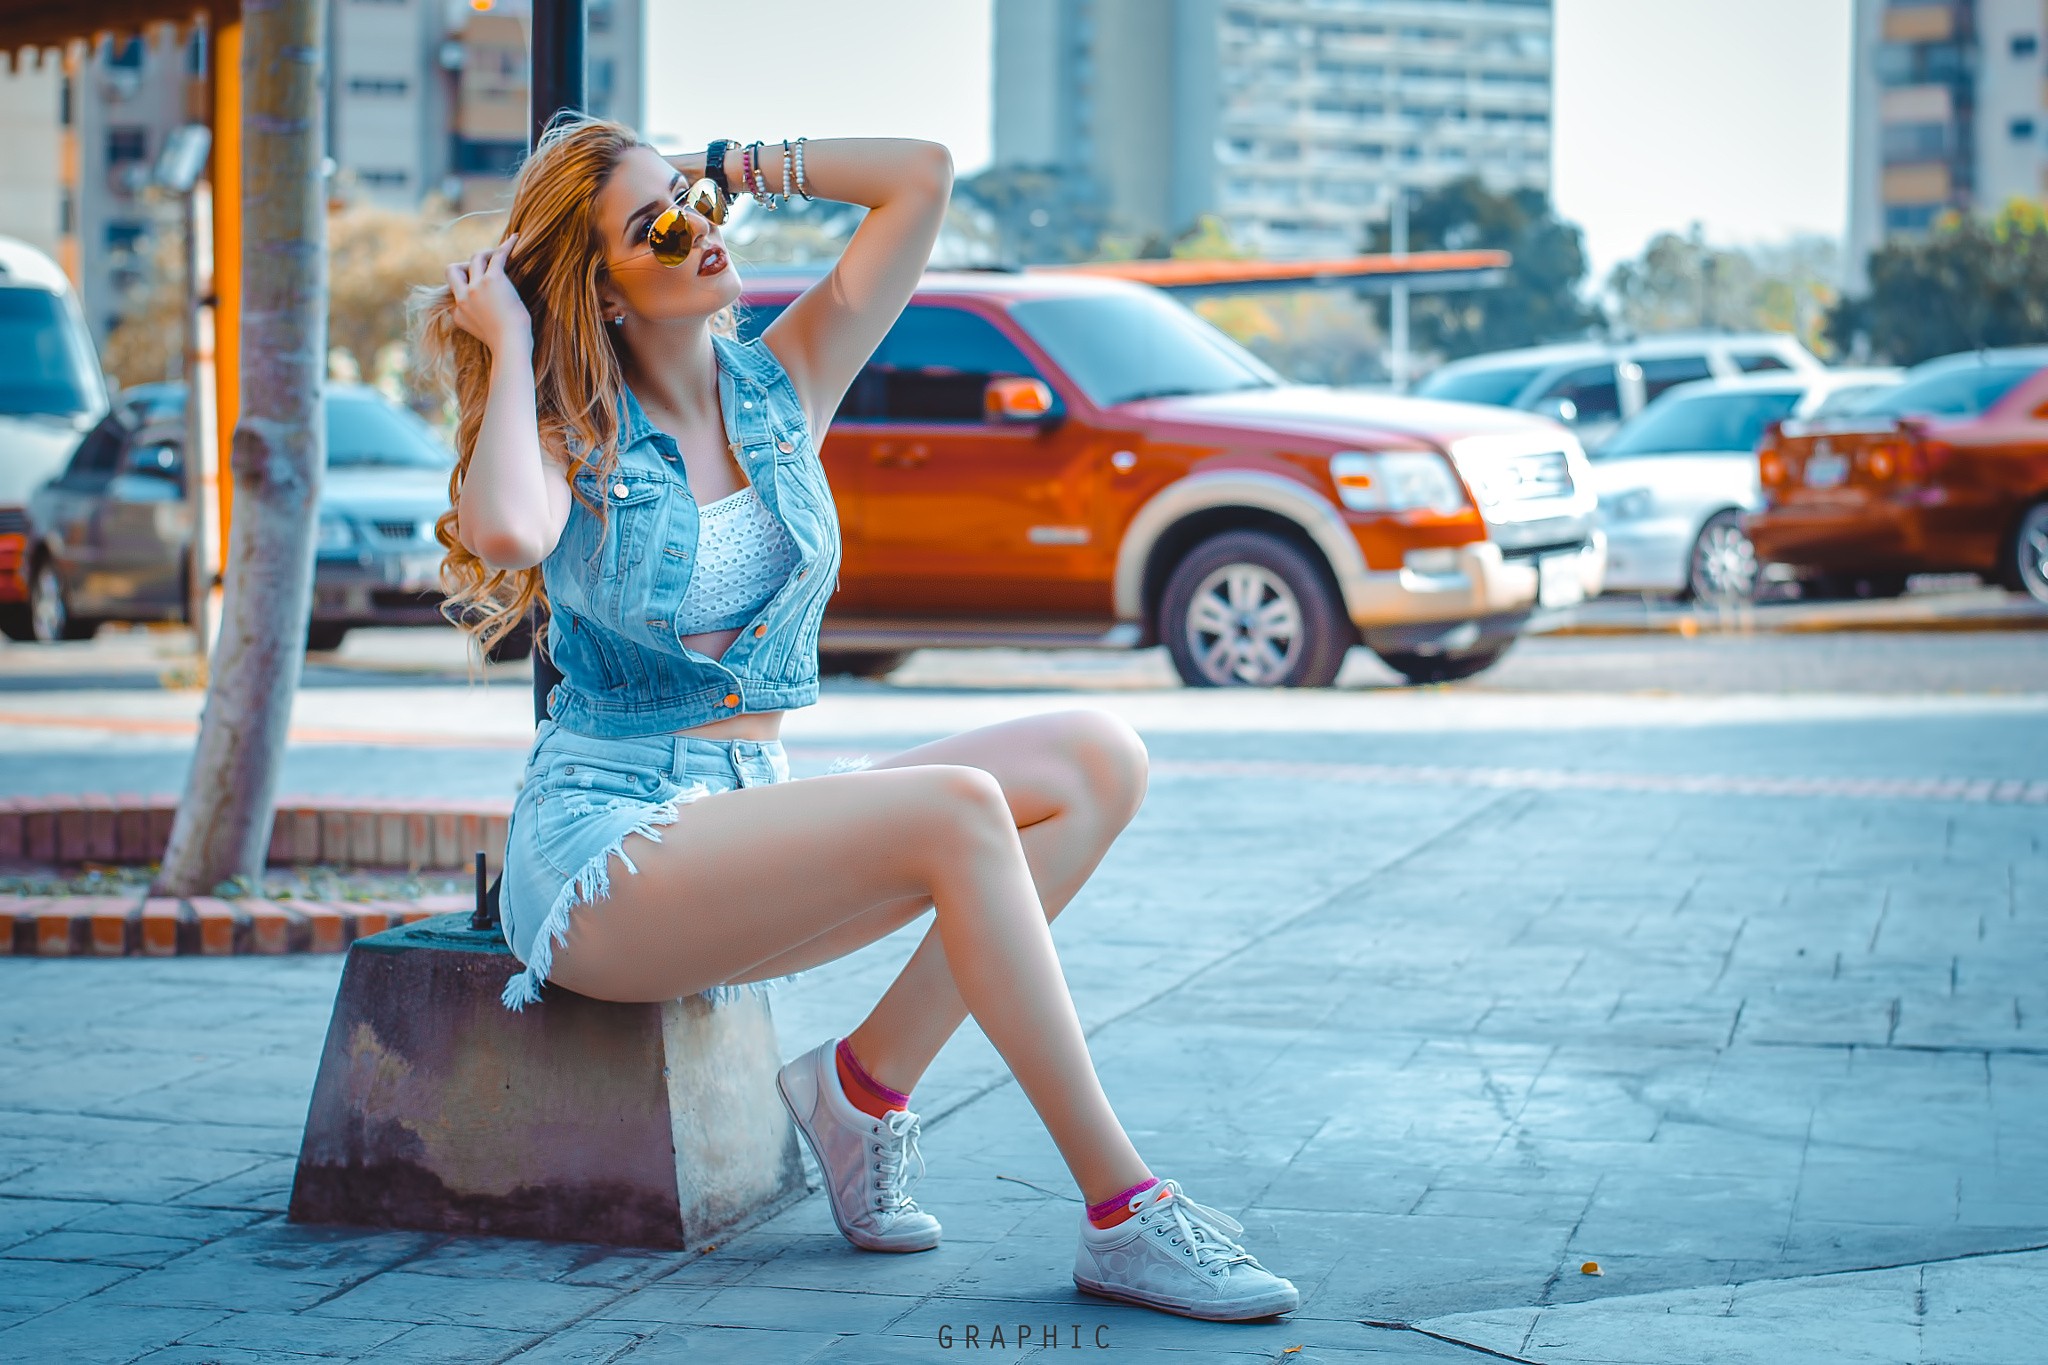 People 2048x1365 women blonde sunglasses sneakers armpits socks jean shorts denim sitting looking away hands in hair women outdoors urban thighs watermarked shoes women with shades car vehicle arms up bracelets city model